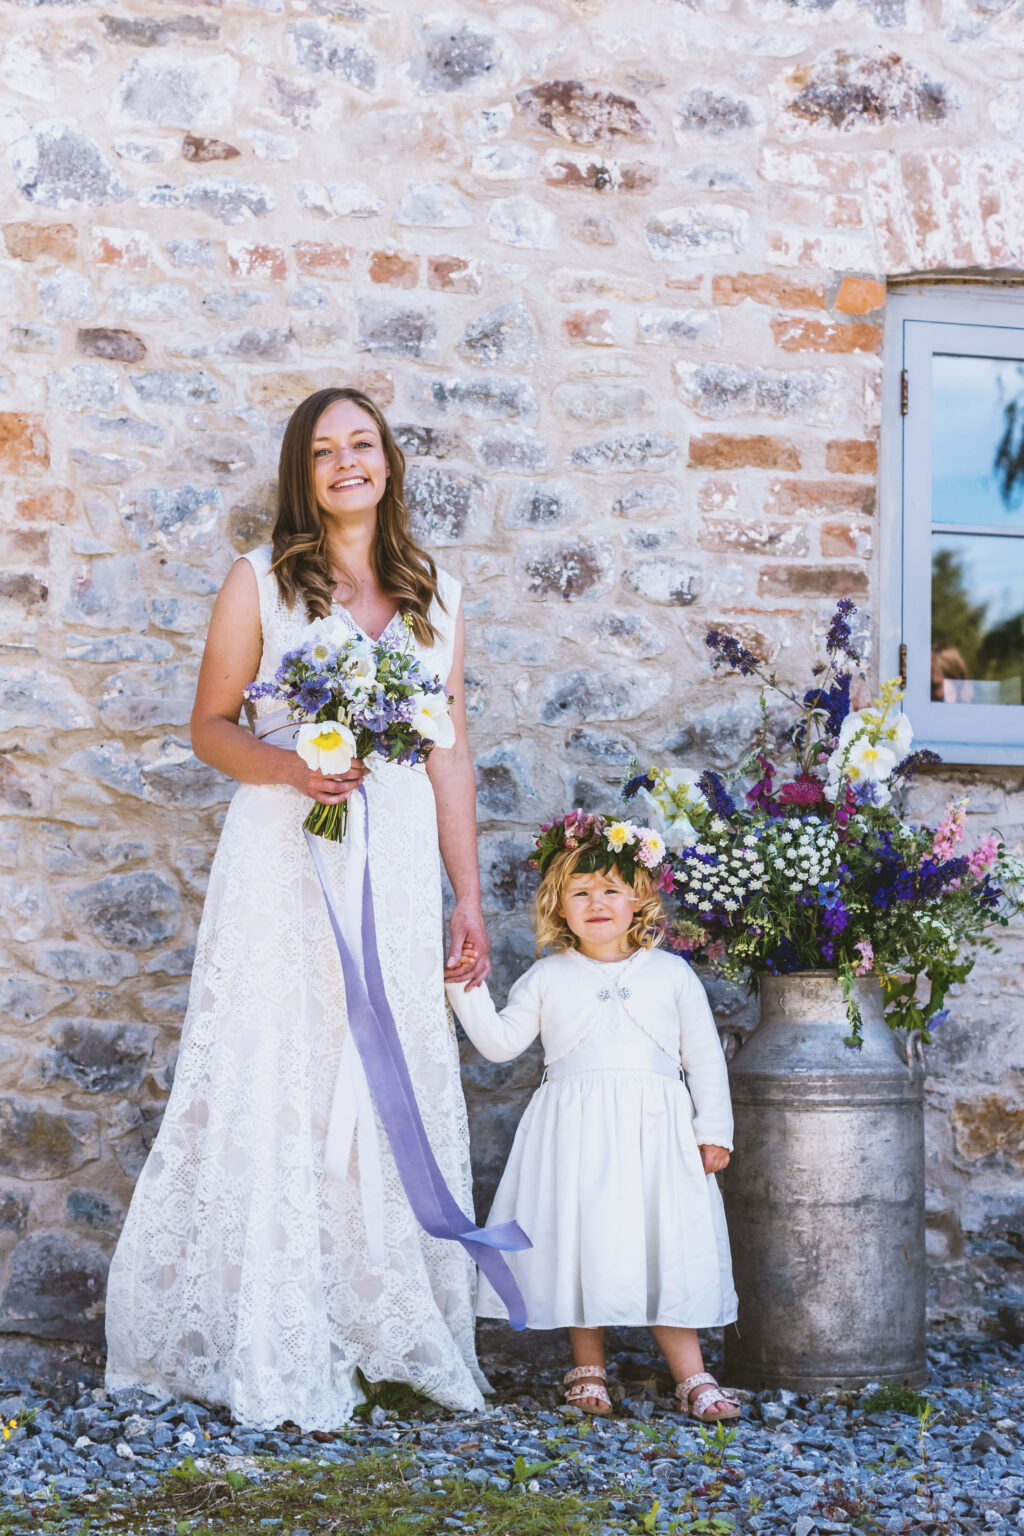 A bride and flower girl with British grown wedding flowers by The Floral Potager stand smiling against a rustic brick wall